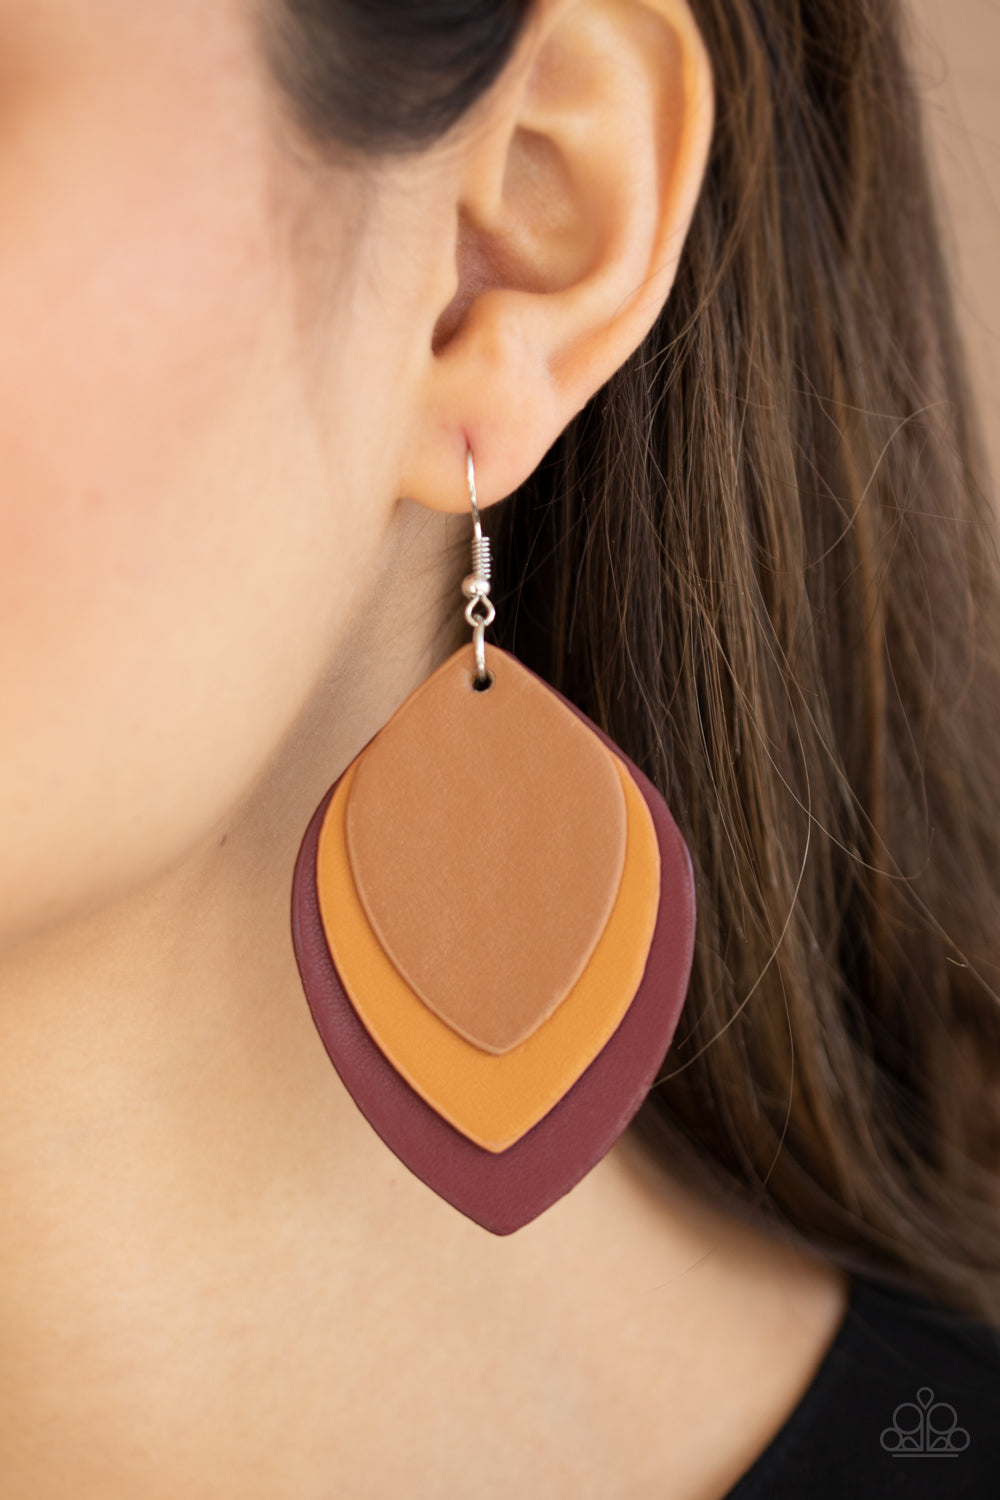 Light as a LEATHER - Red & Brown Leather Earrings - Princess Glam Shop